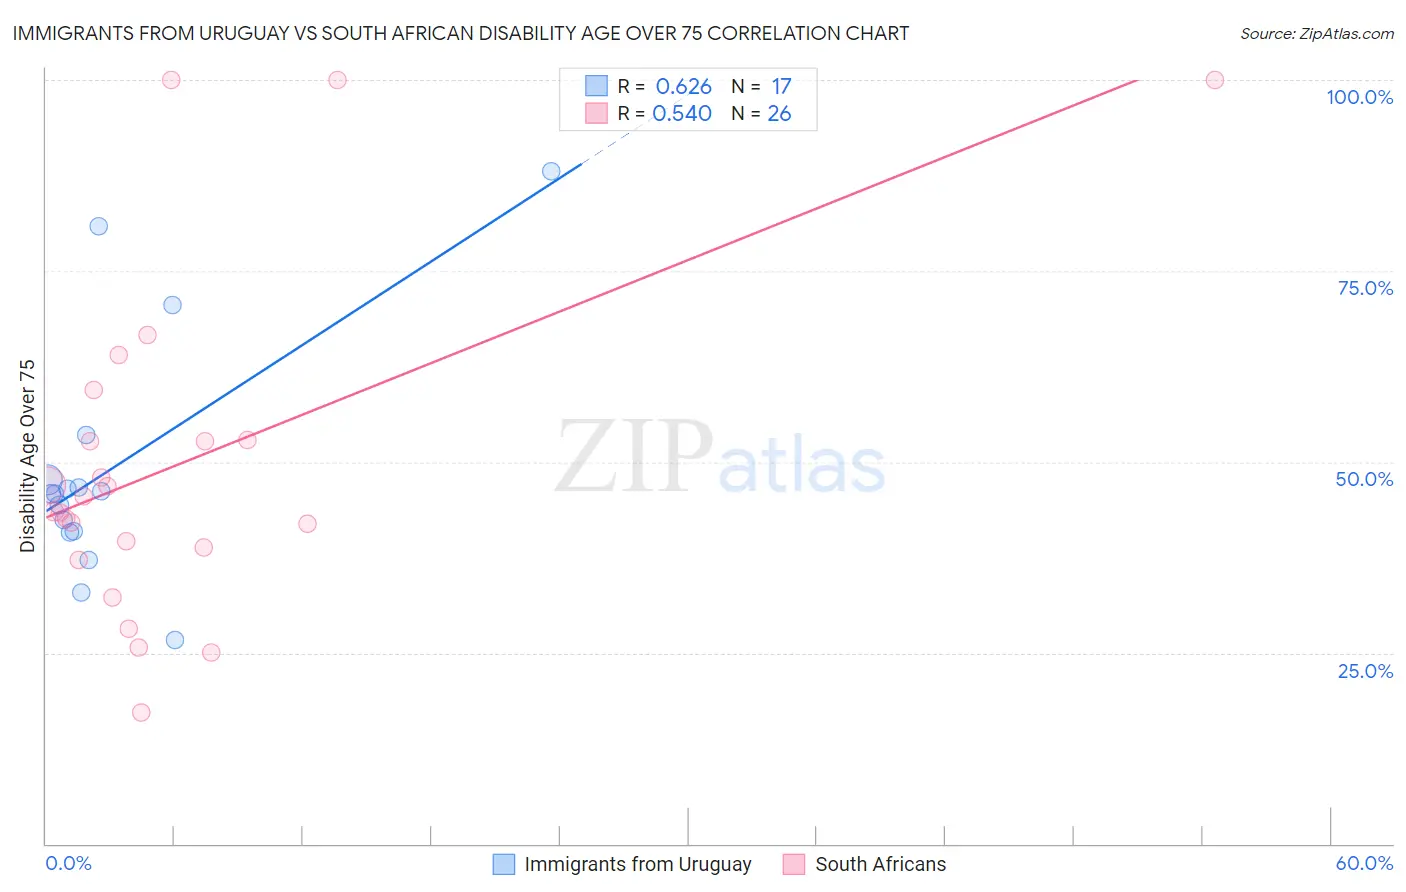 Immigrants from Uruguay vs South African Disability Age Over 75